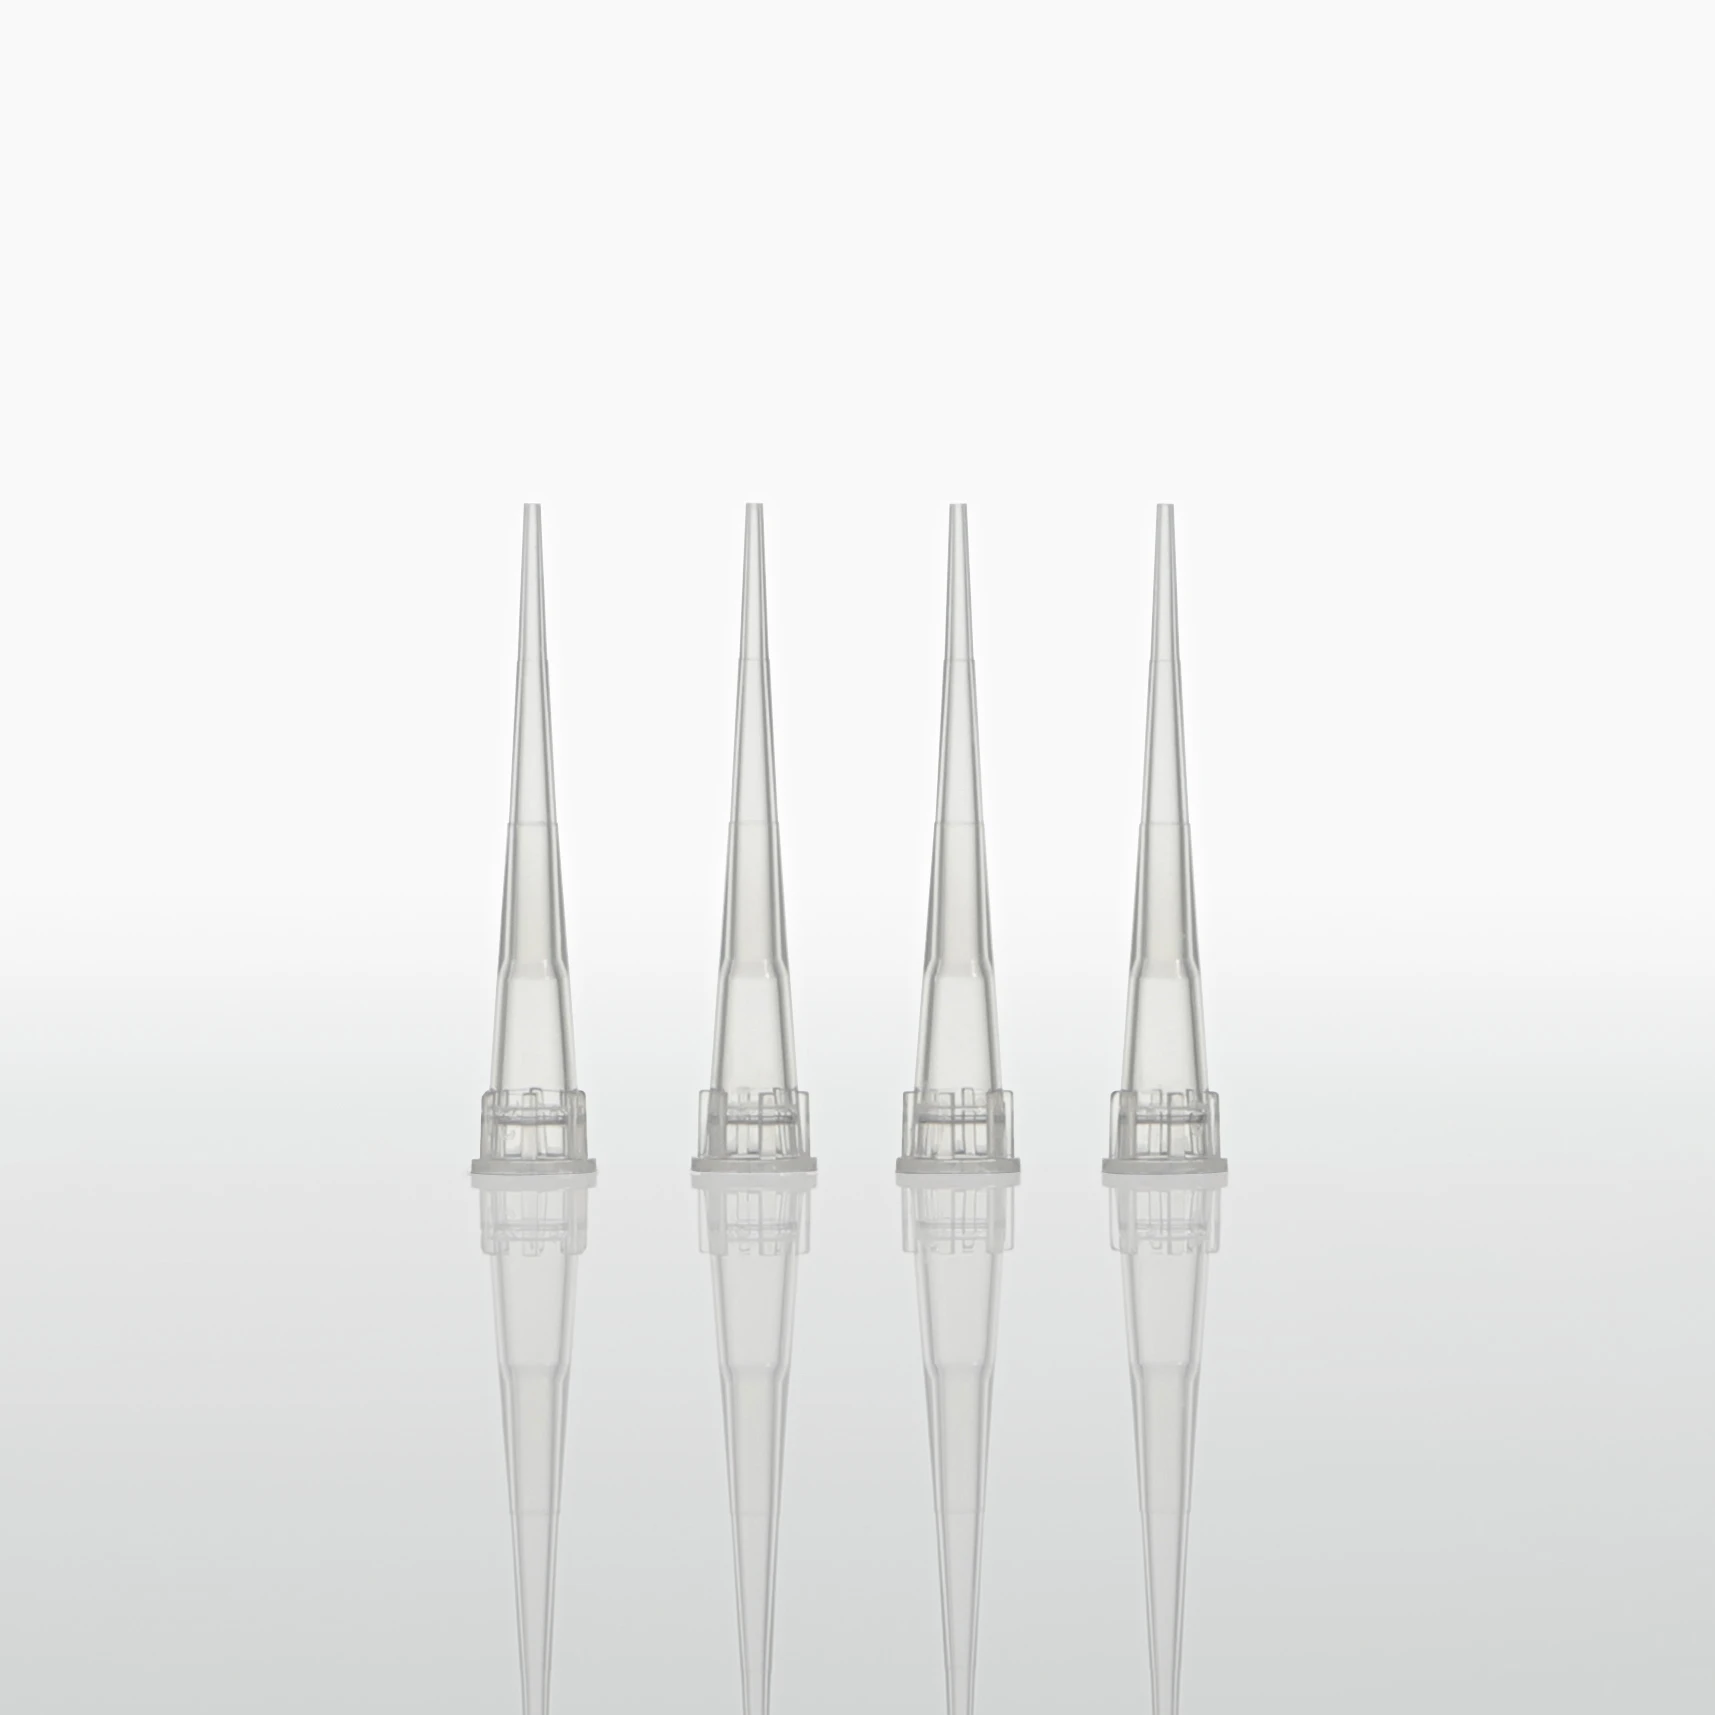 Wholesale 10ul/200ul/300ul/1000ul Low adsorption pipette tip for pipettor laboratory